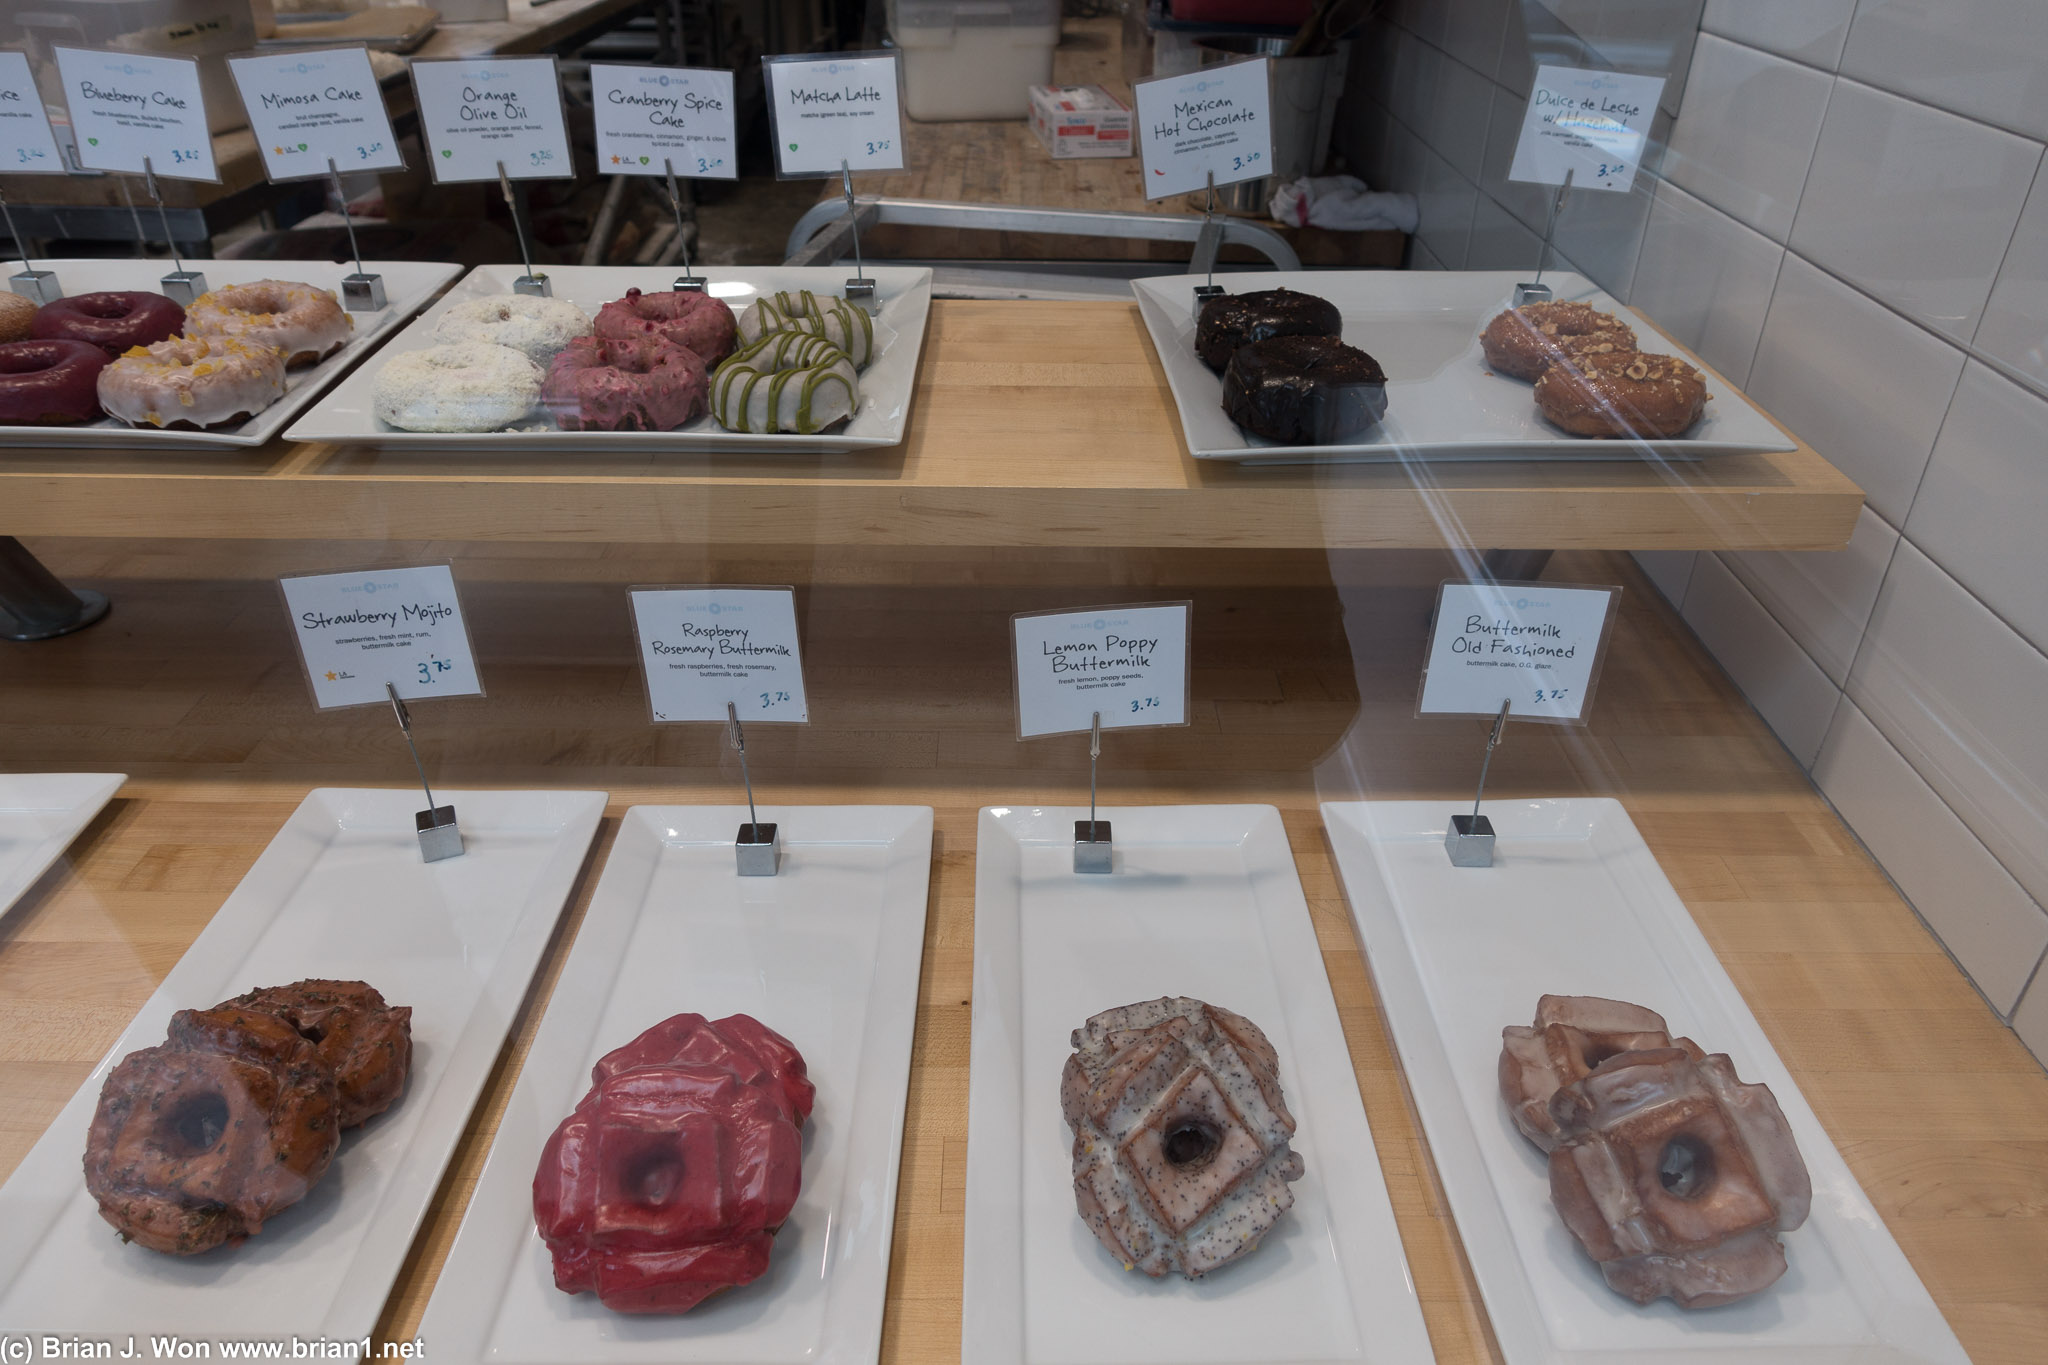 The display donuts.